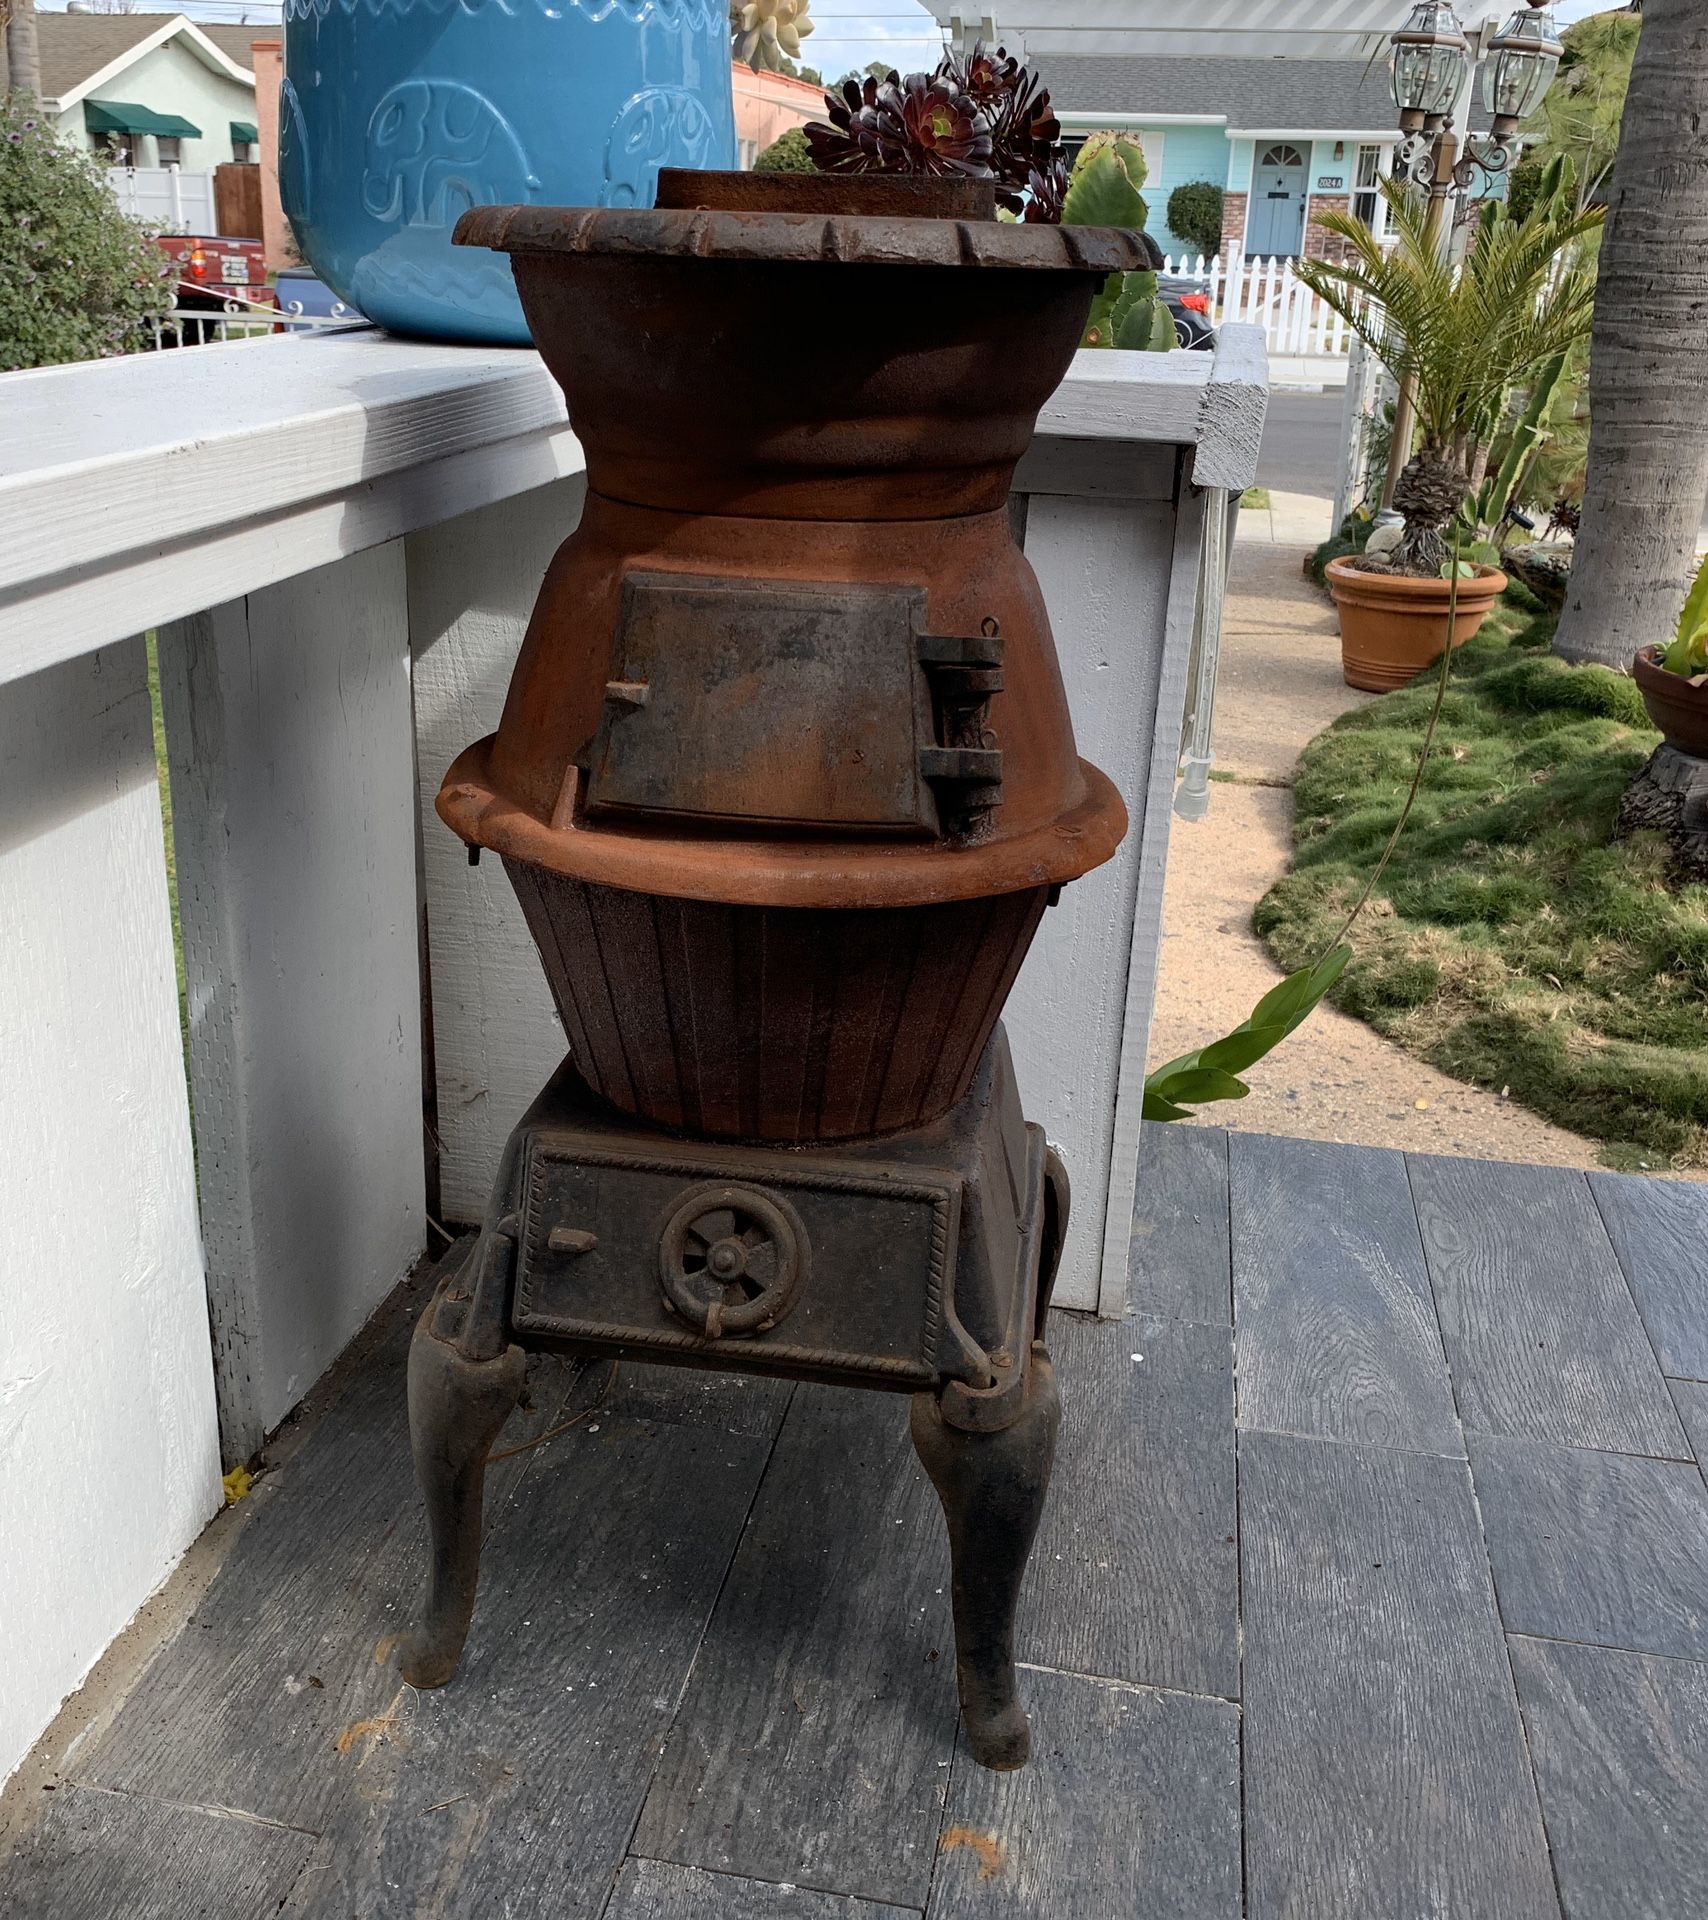 Wood stove/potbelly